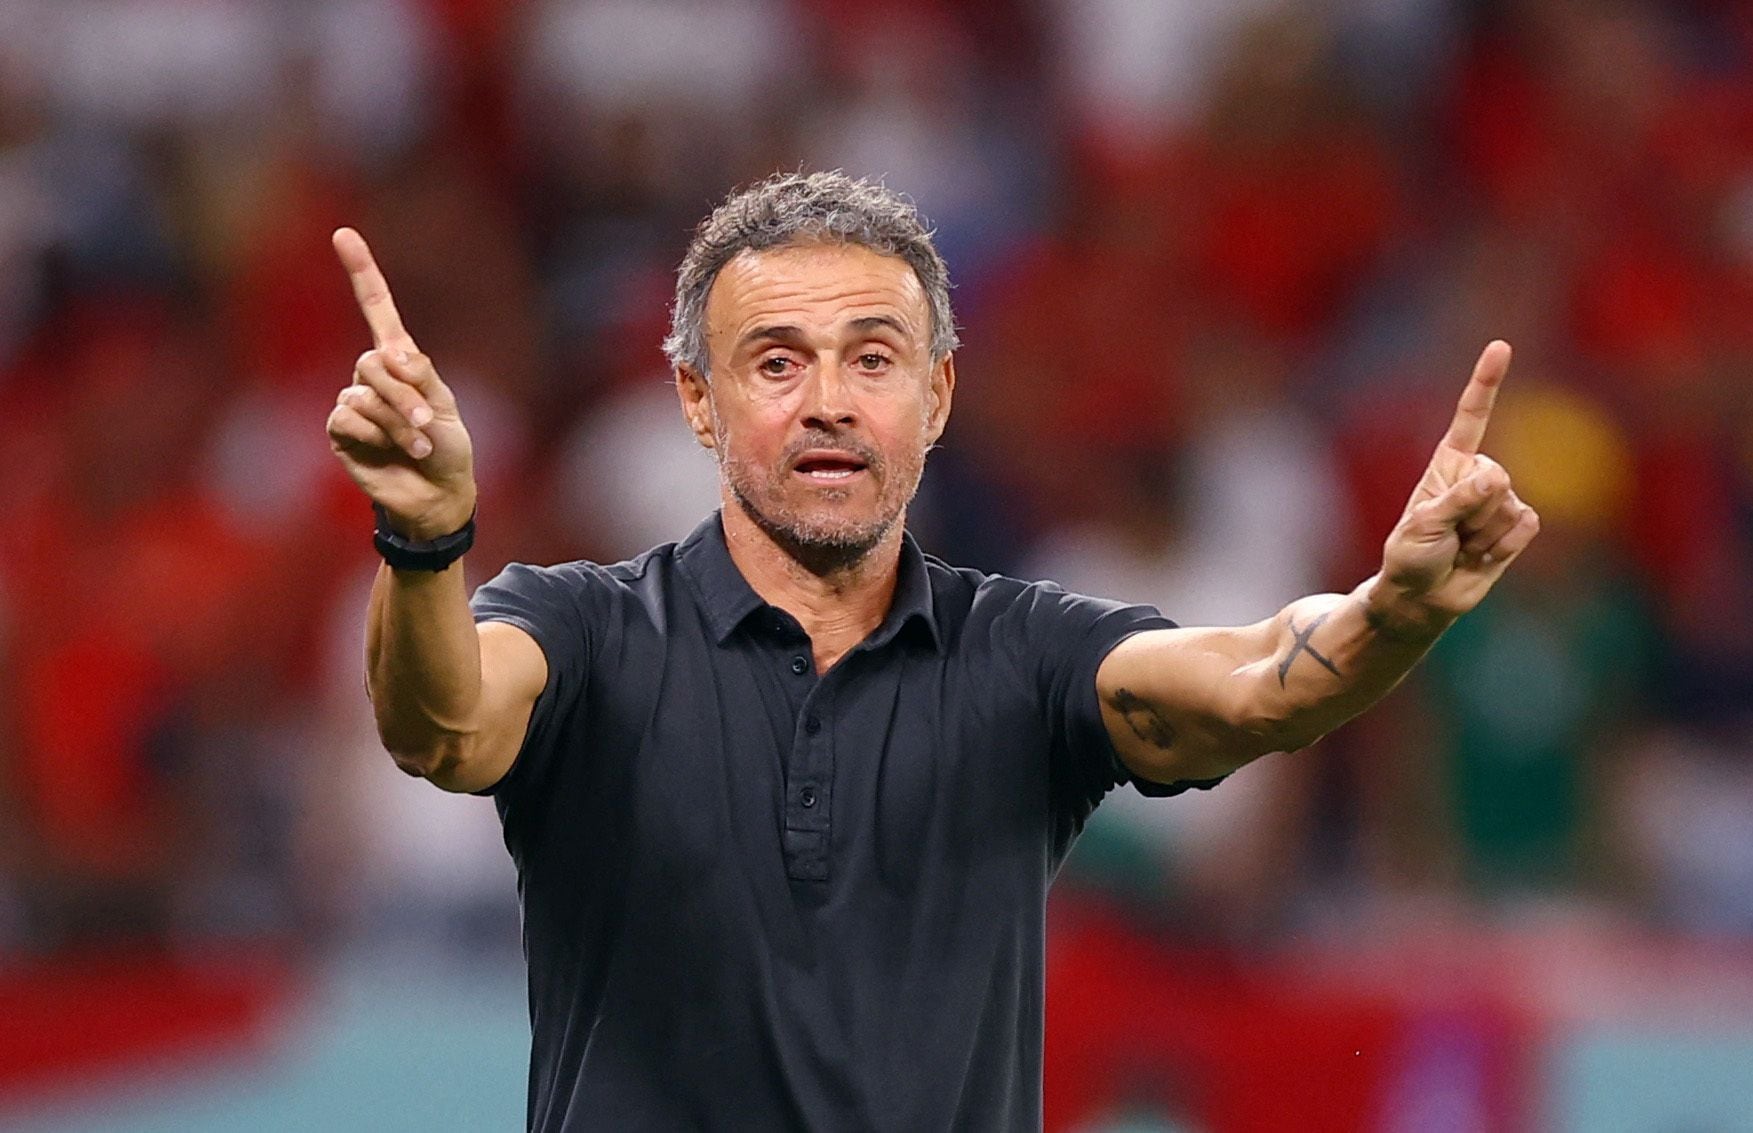 Luis Enrique replaced as Spain's coach after team's disappointing World Cup  exit - The Globe and Mail